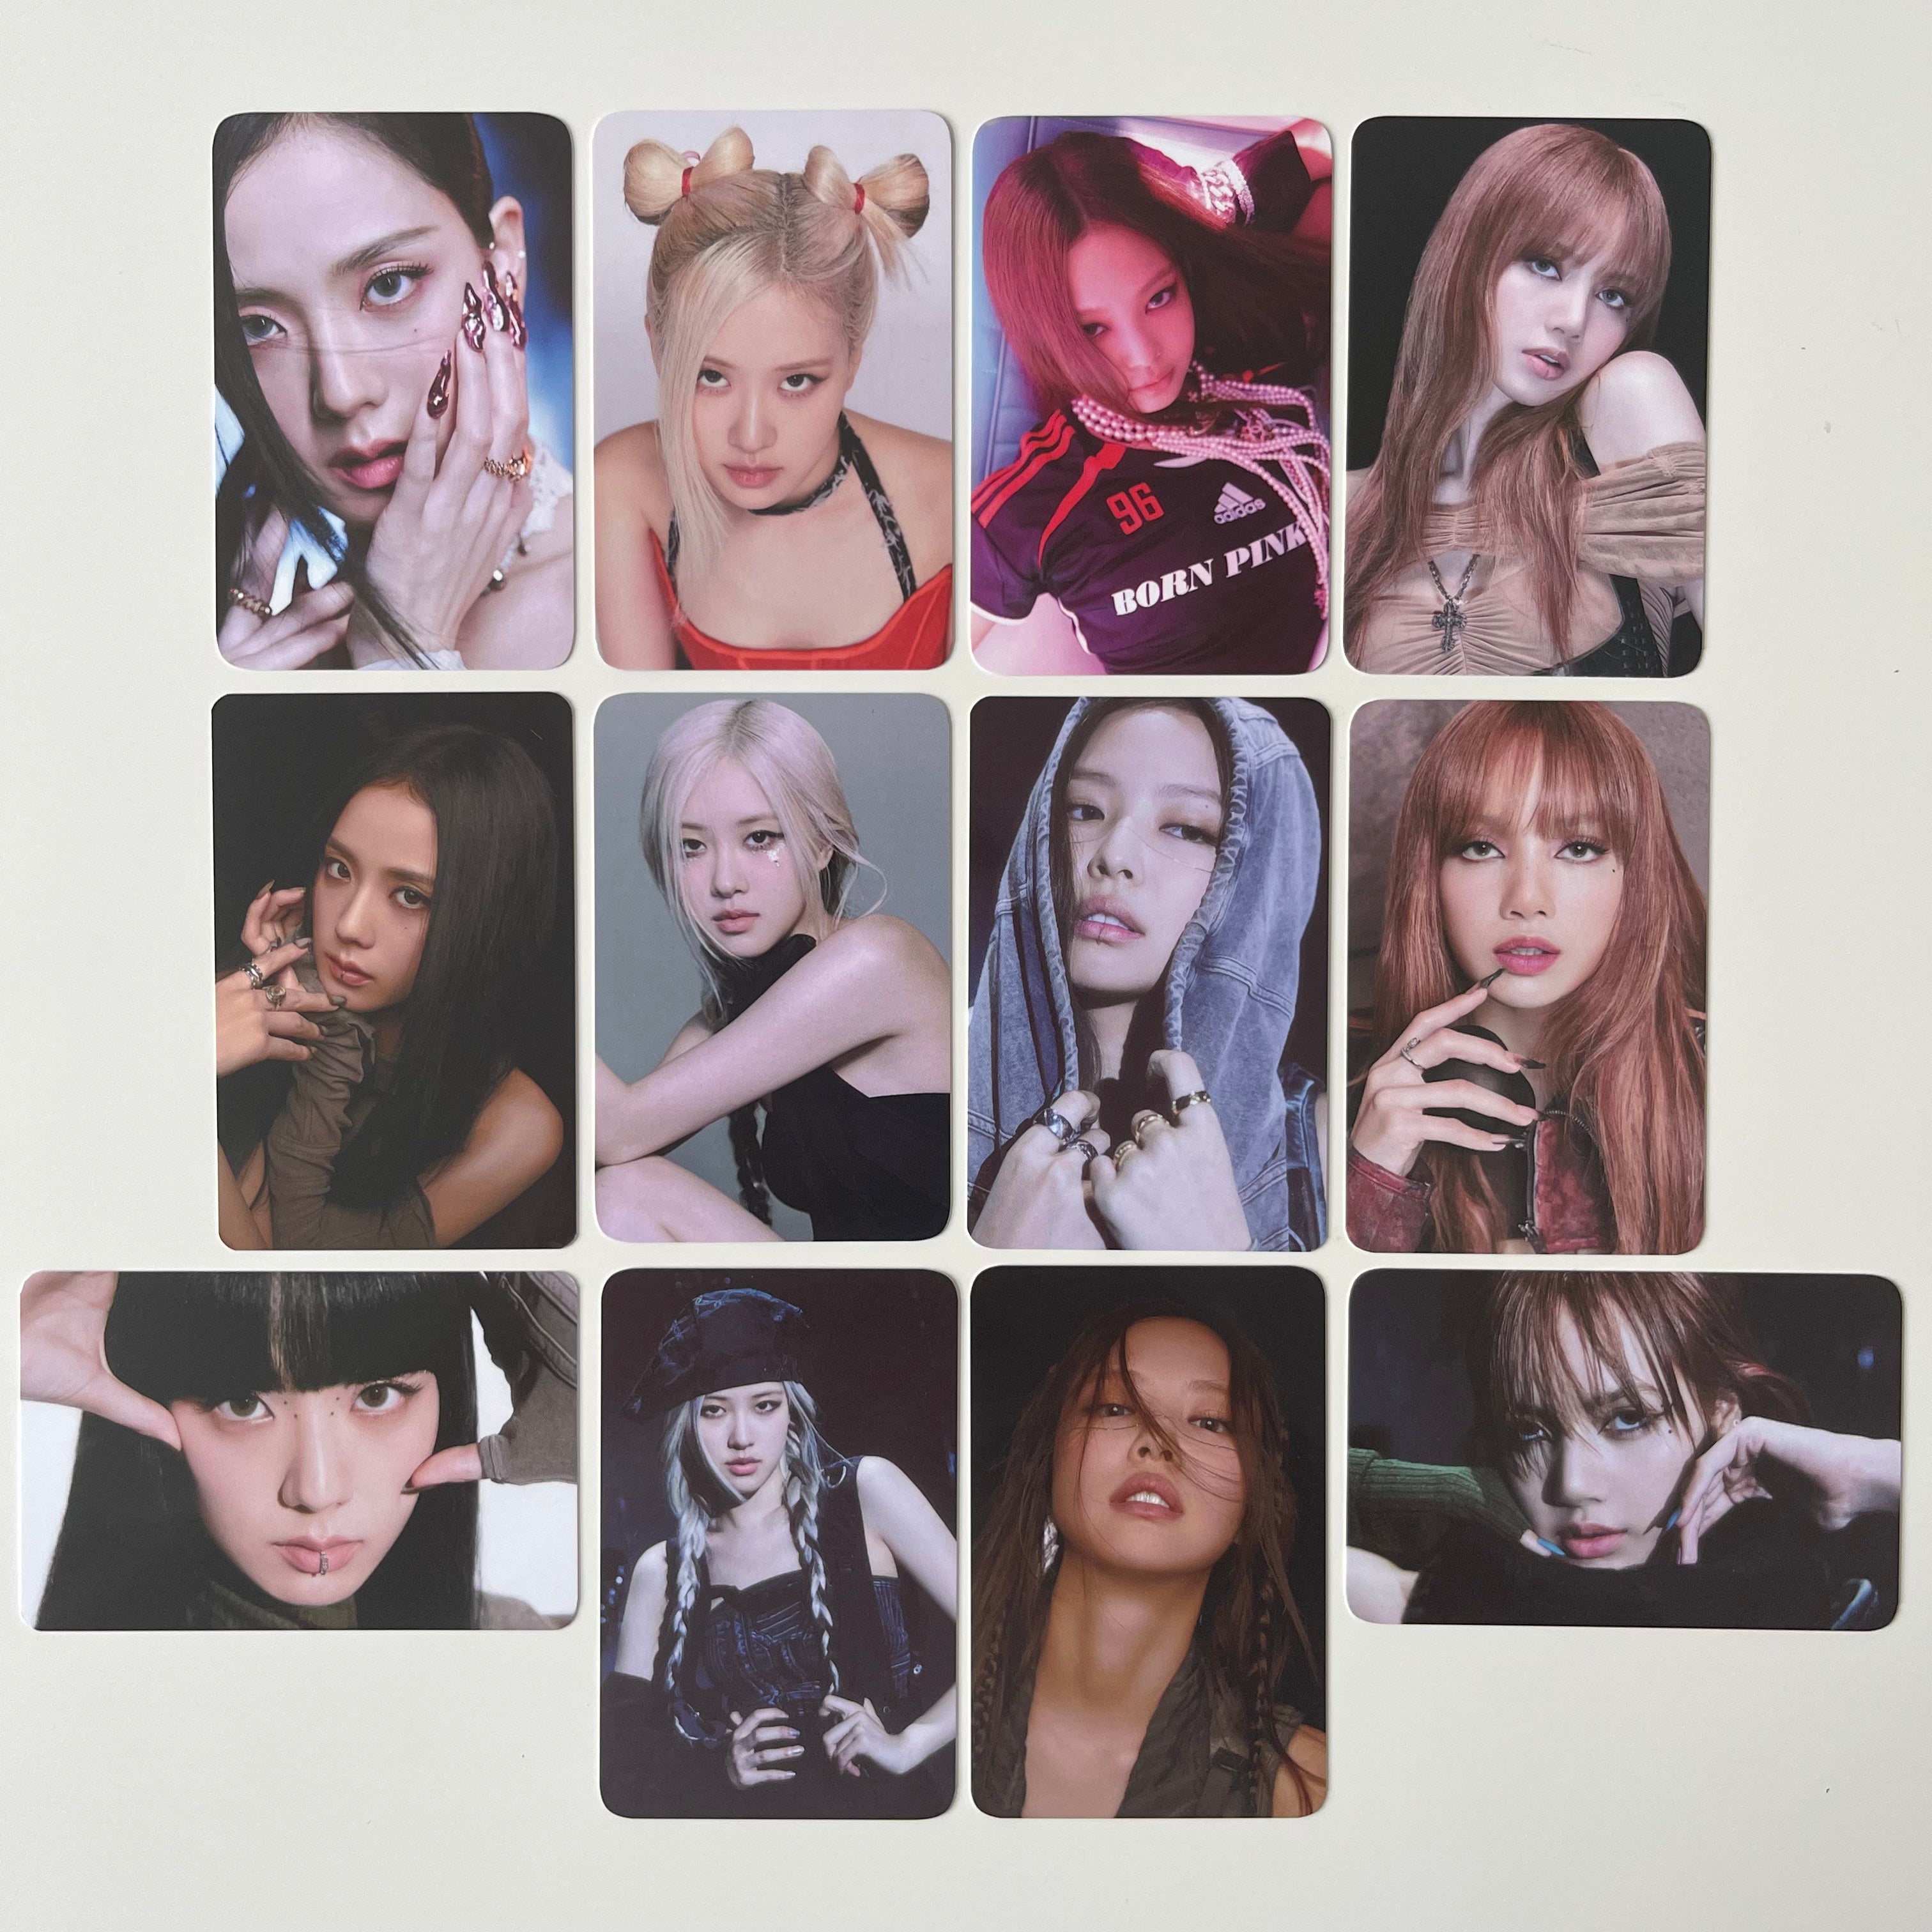 Blackpink welcoming collection and bornpink photocards